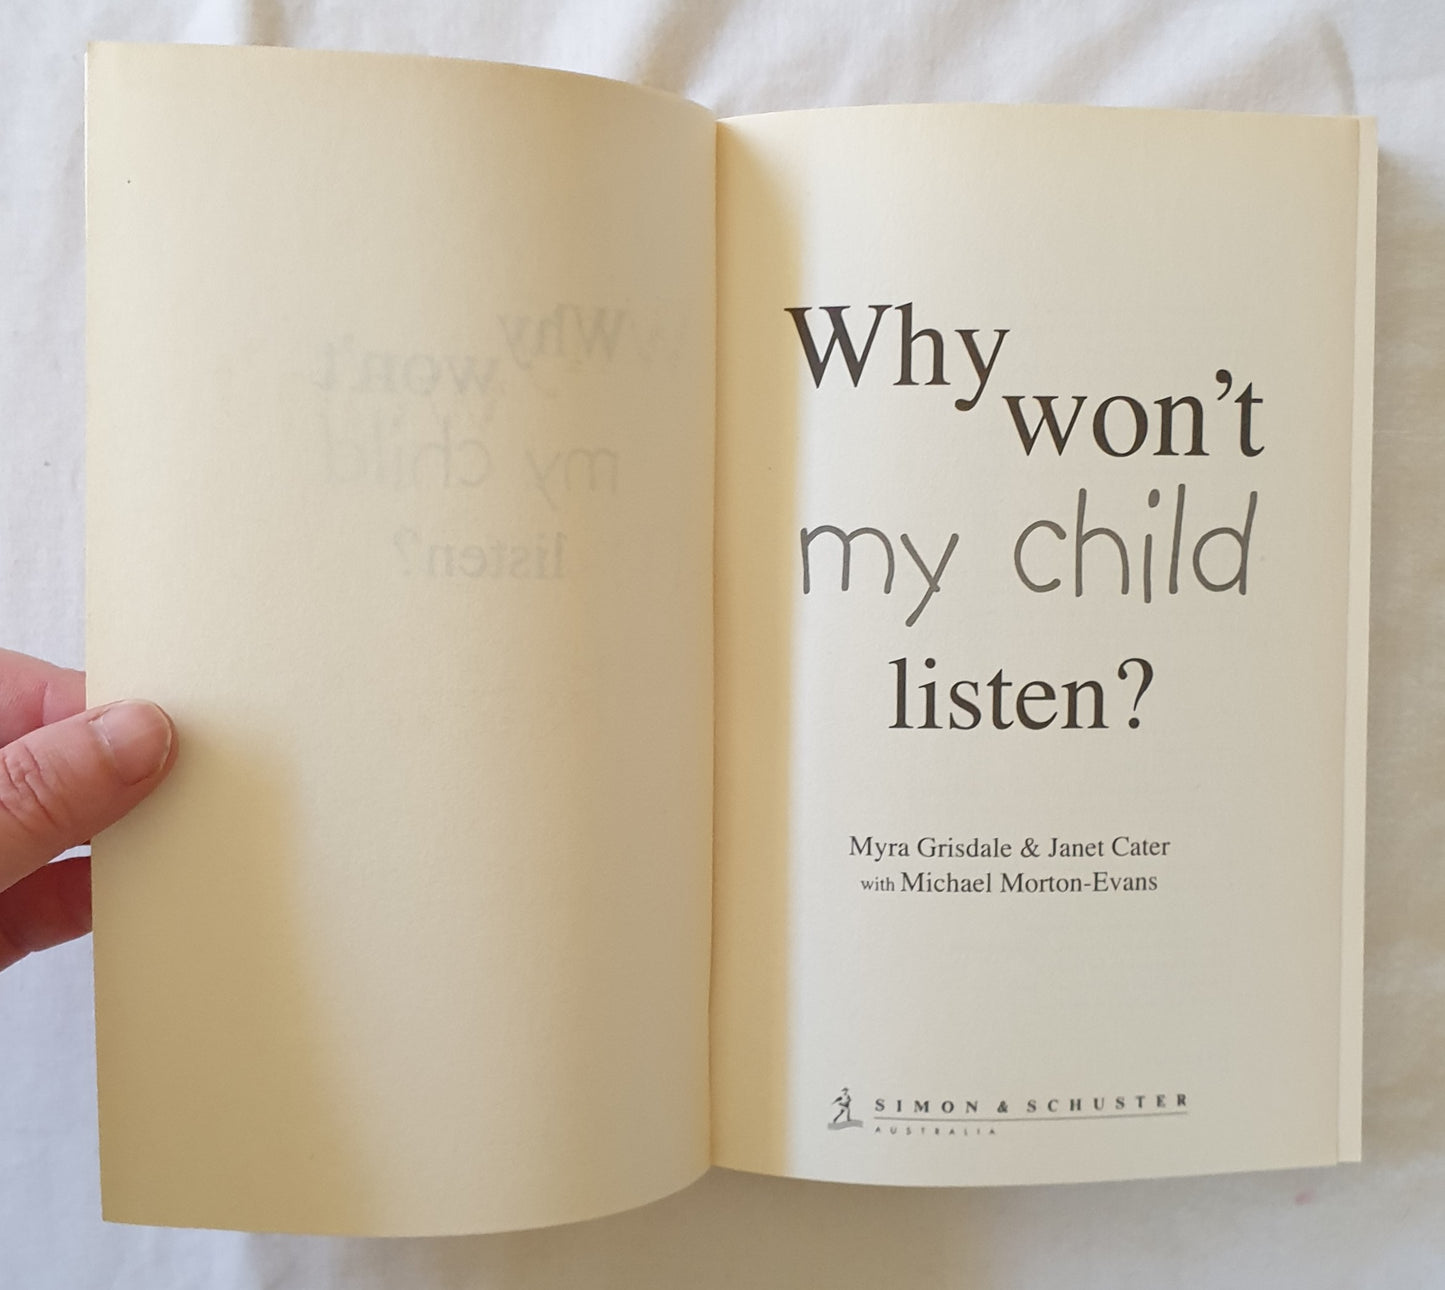 Why Won’t My Child Listen by Myra Grisdale and Janet Cater with Michael Morton-Evans